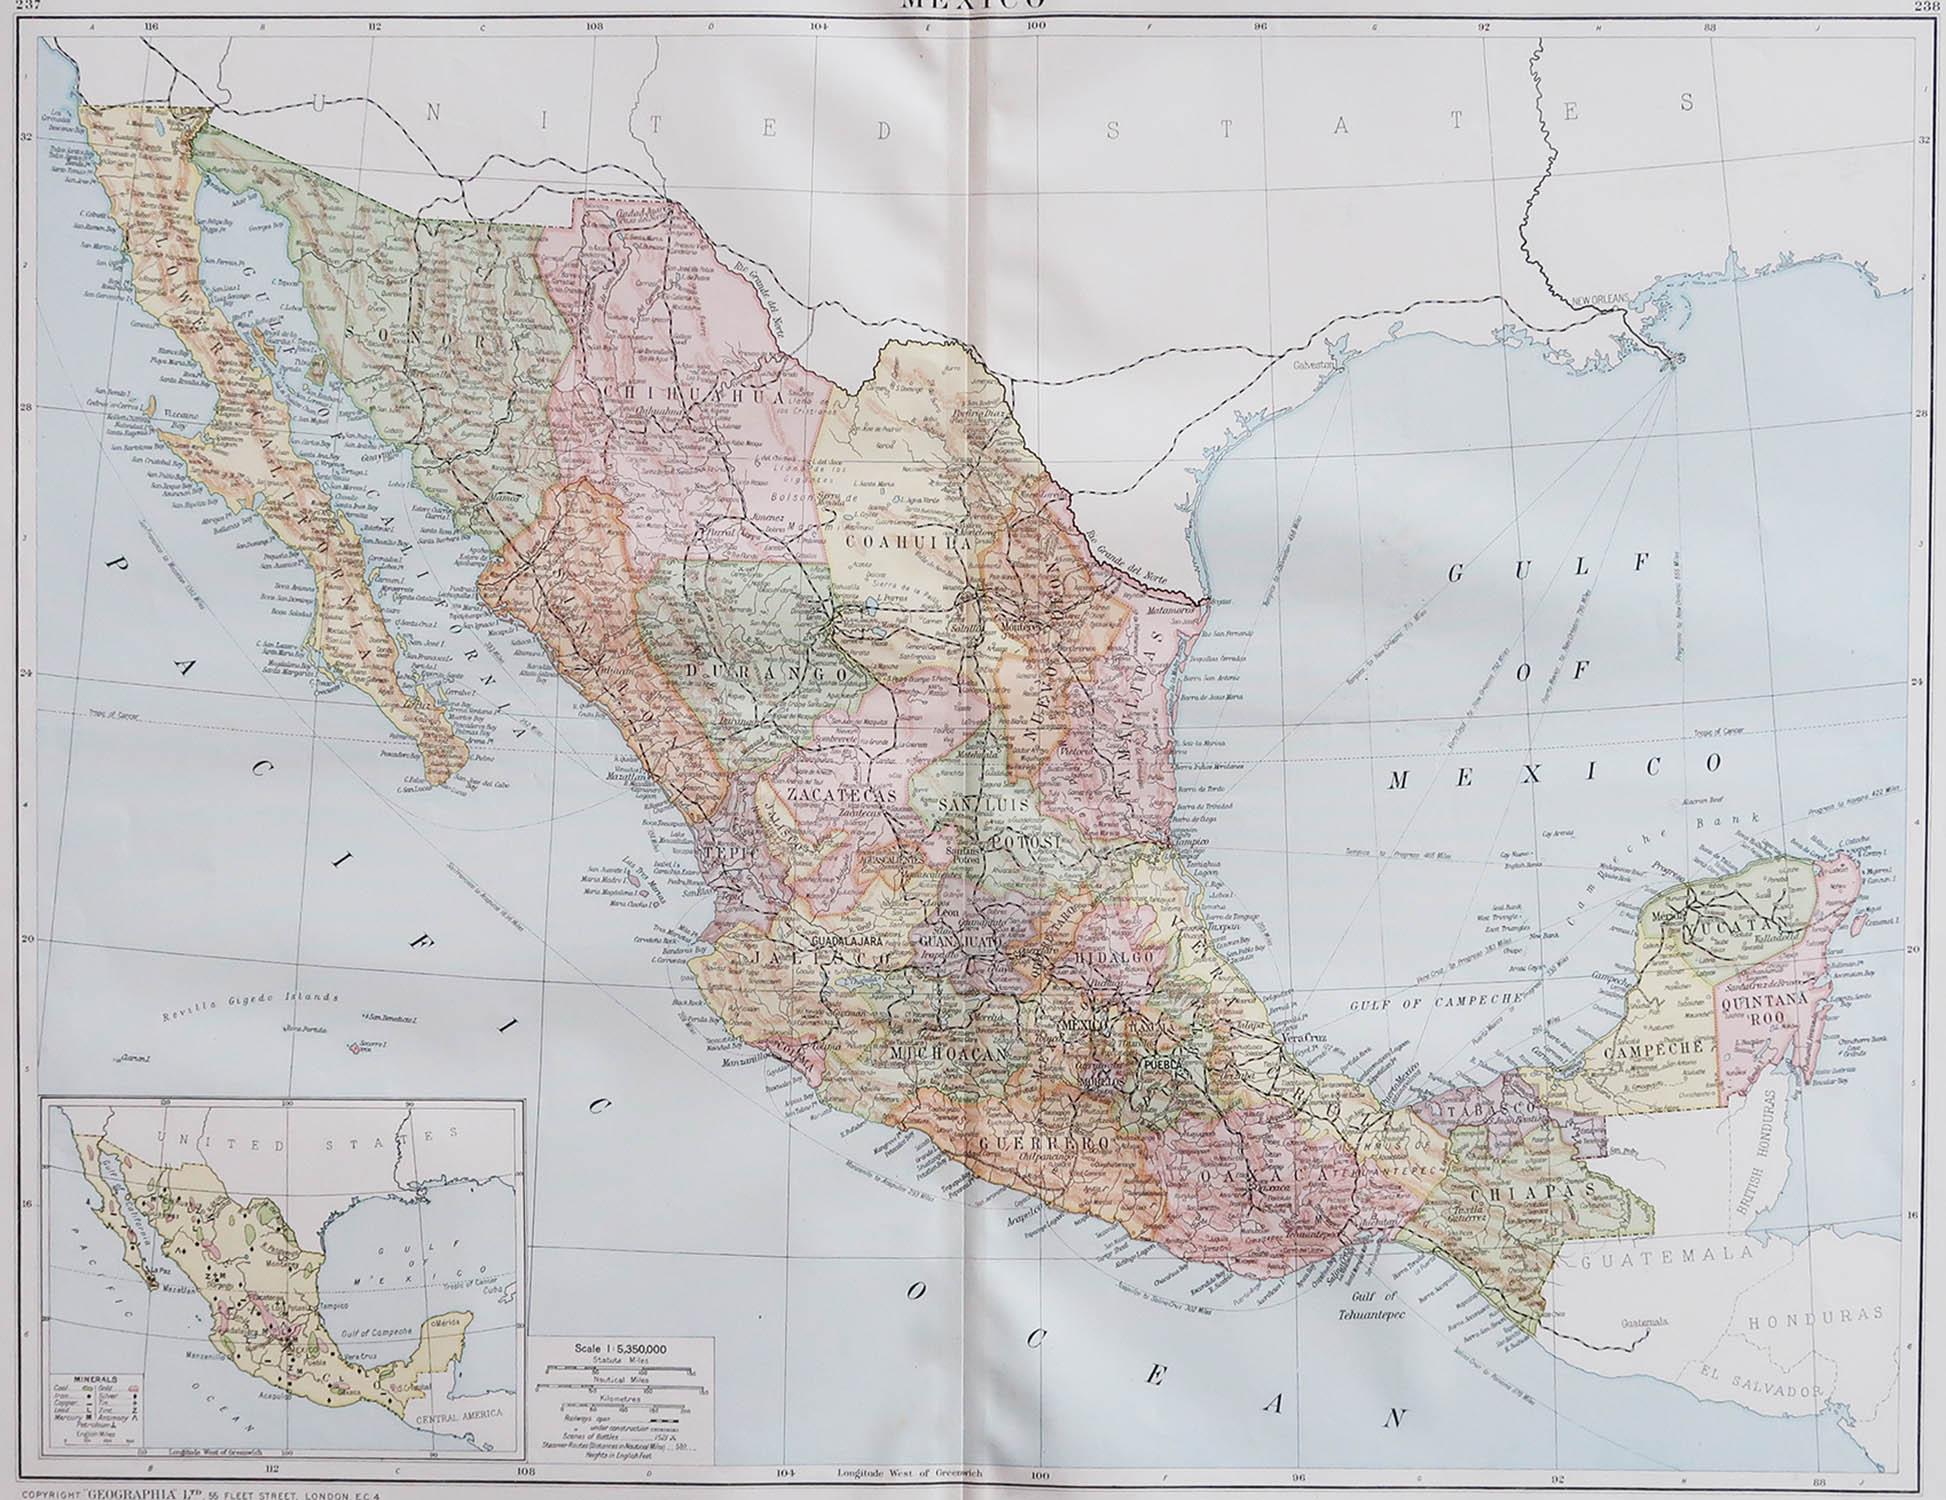 Great map of Mexico

Original color. 

Good condition 

Published by Alexander Gross

Unframed.








